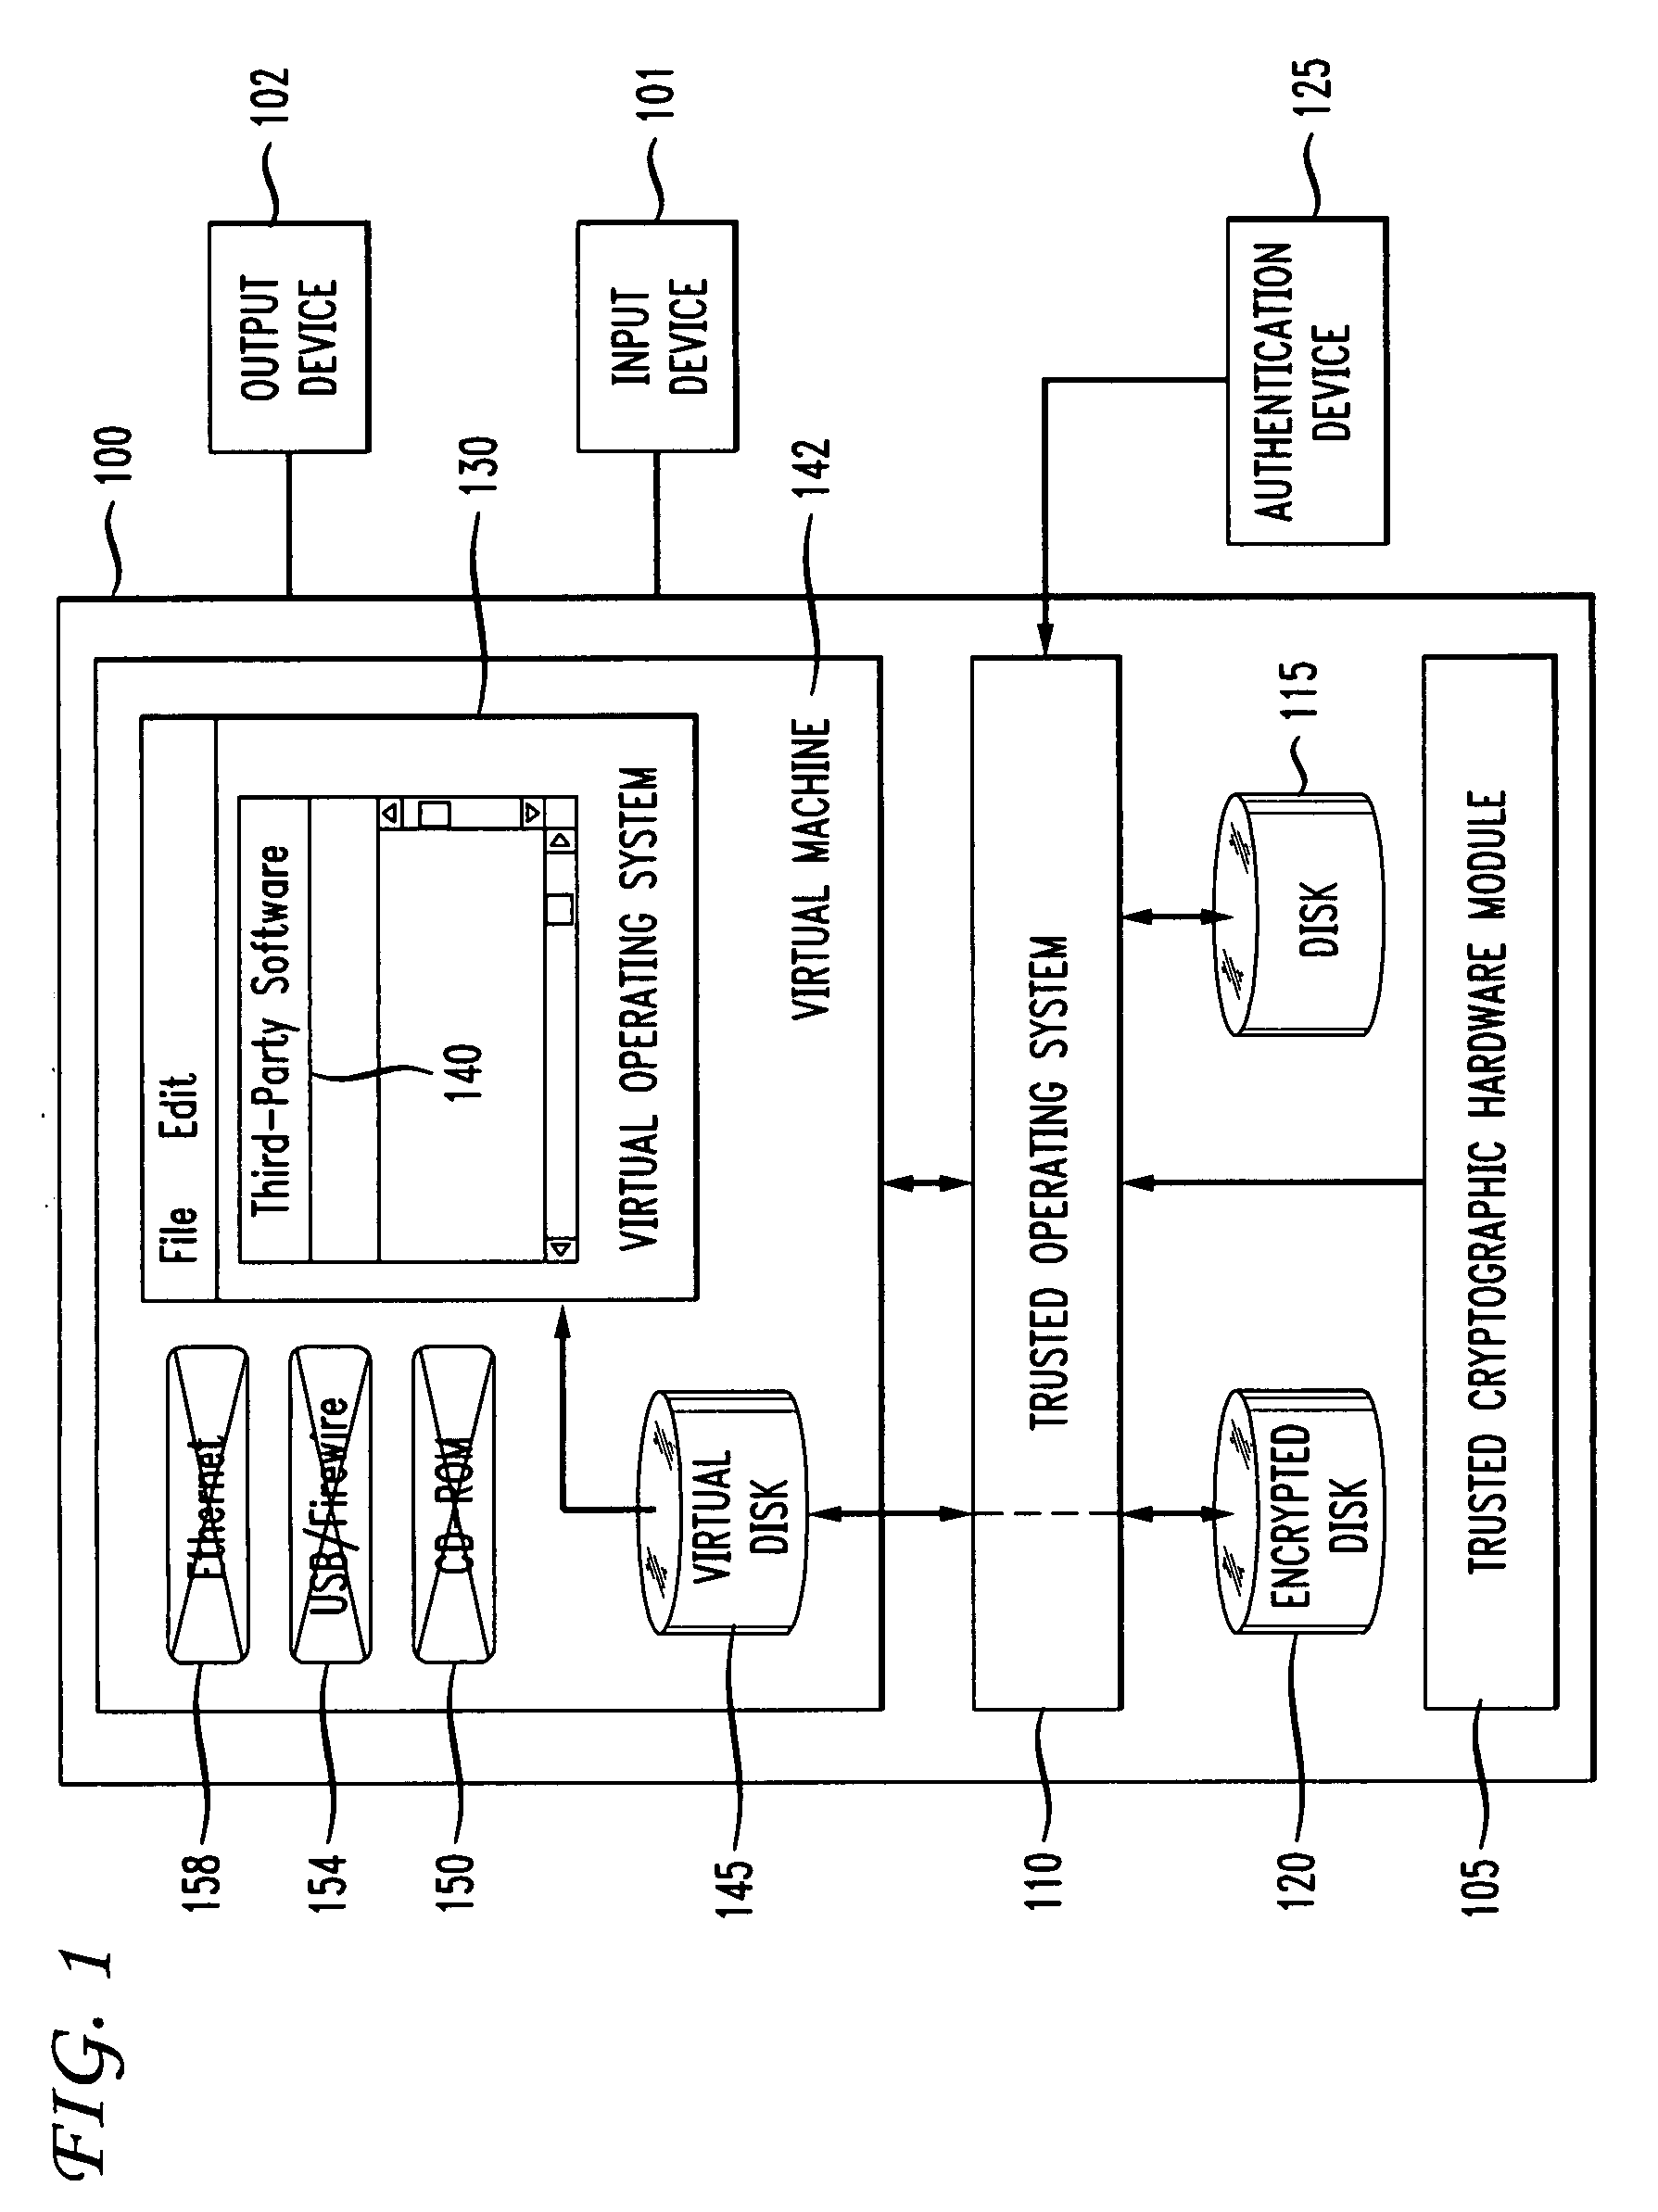 Method and apparatus for limiting access to sensitive data